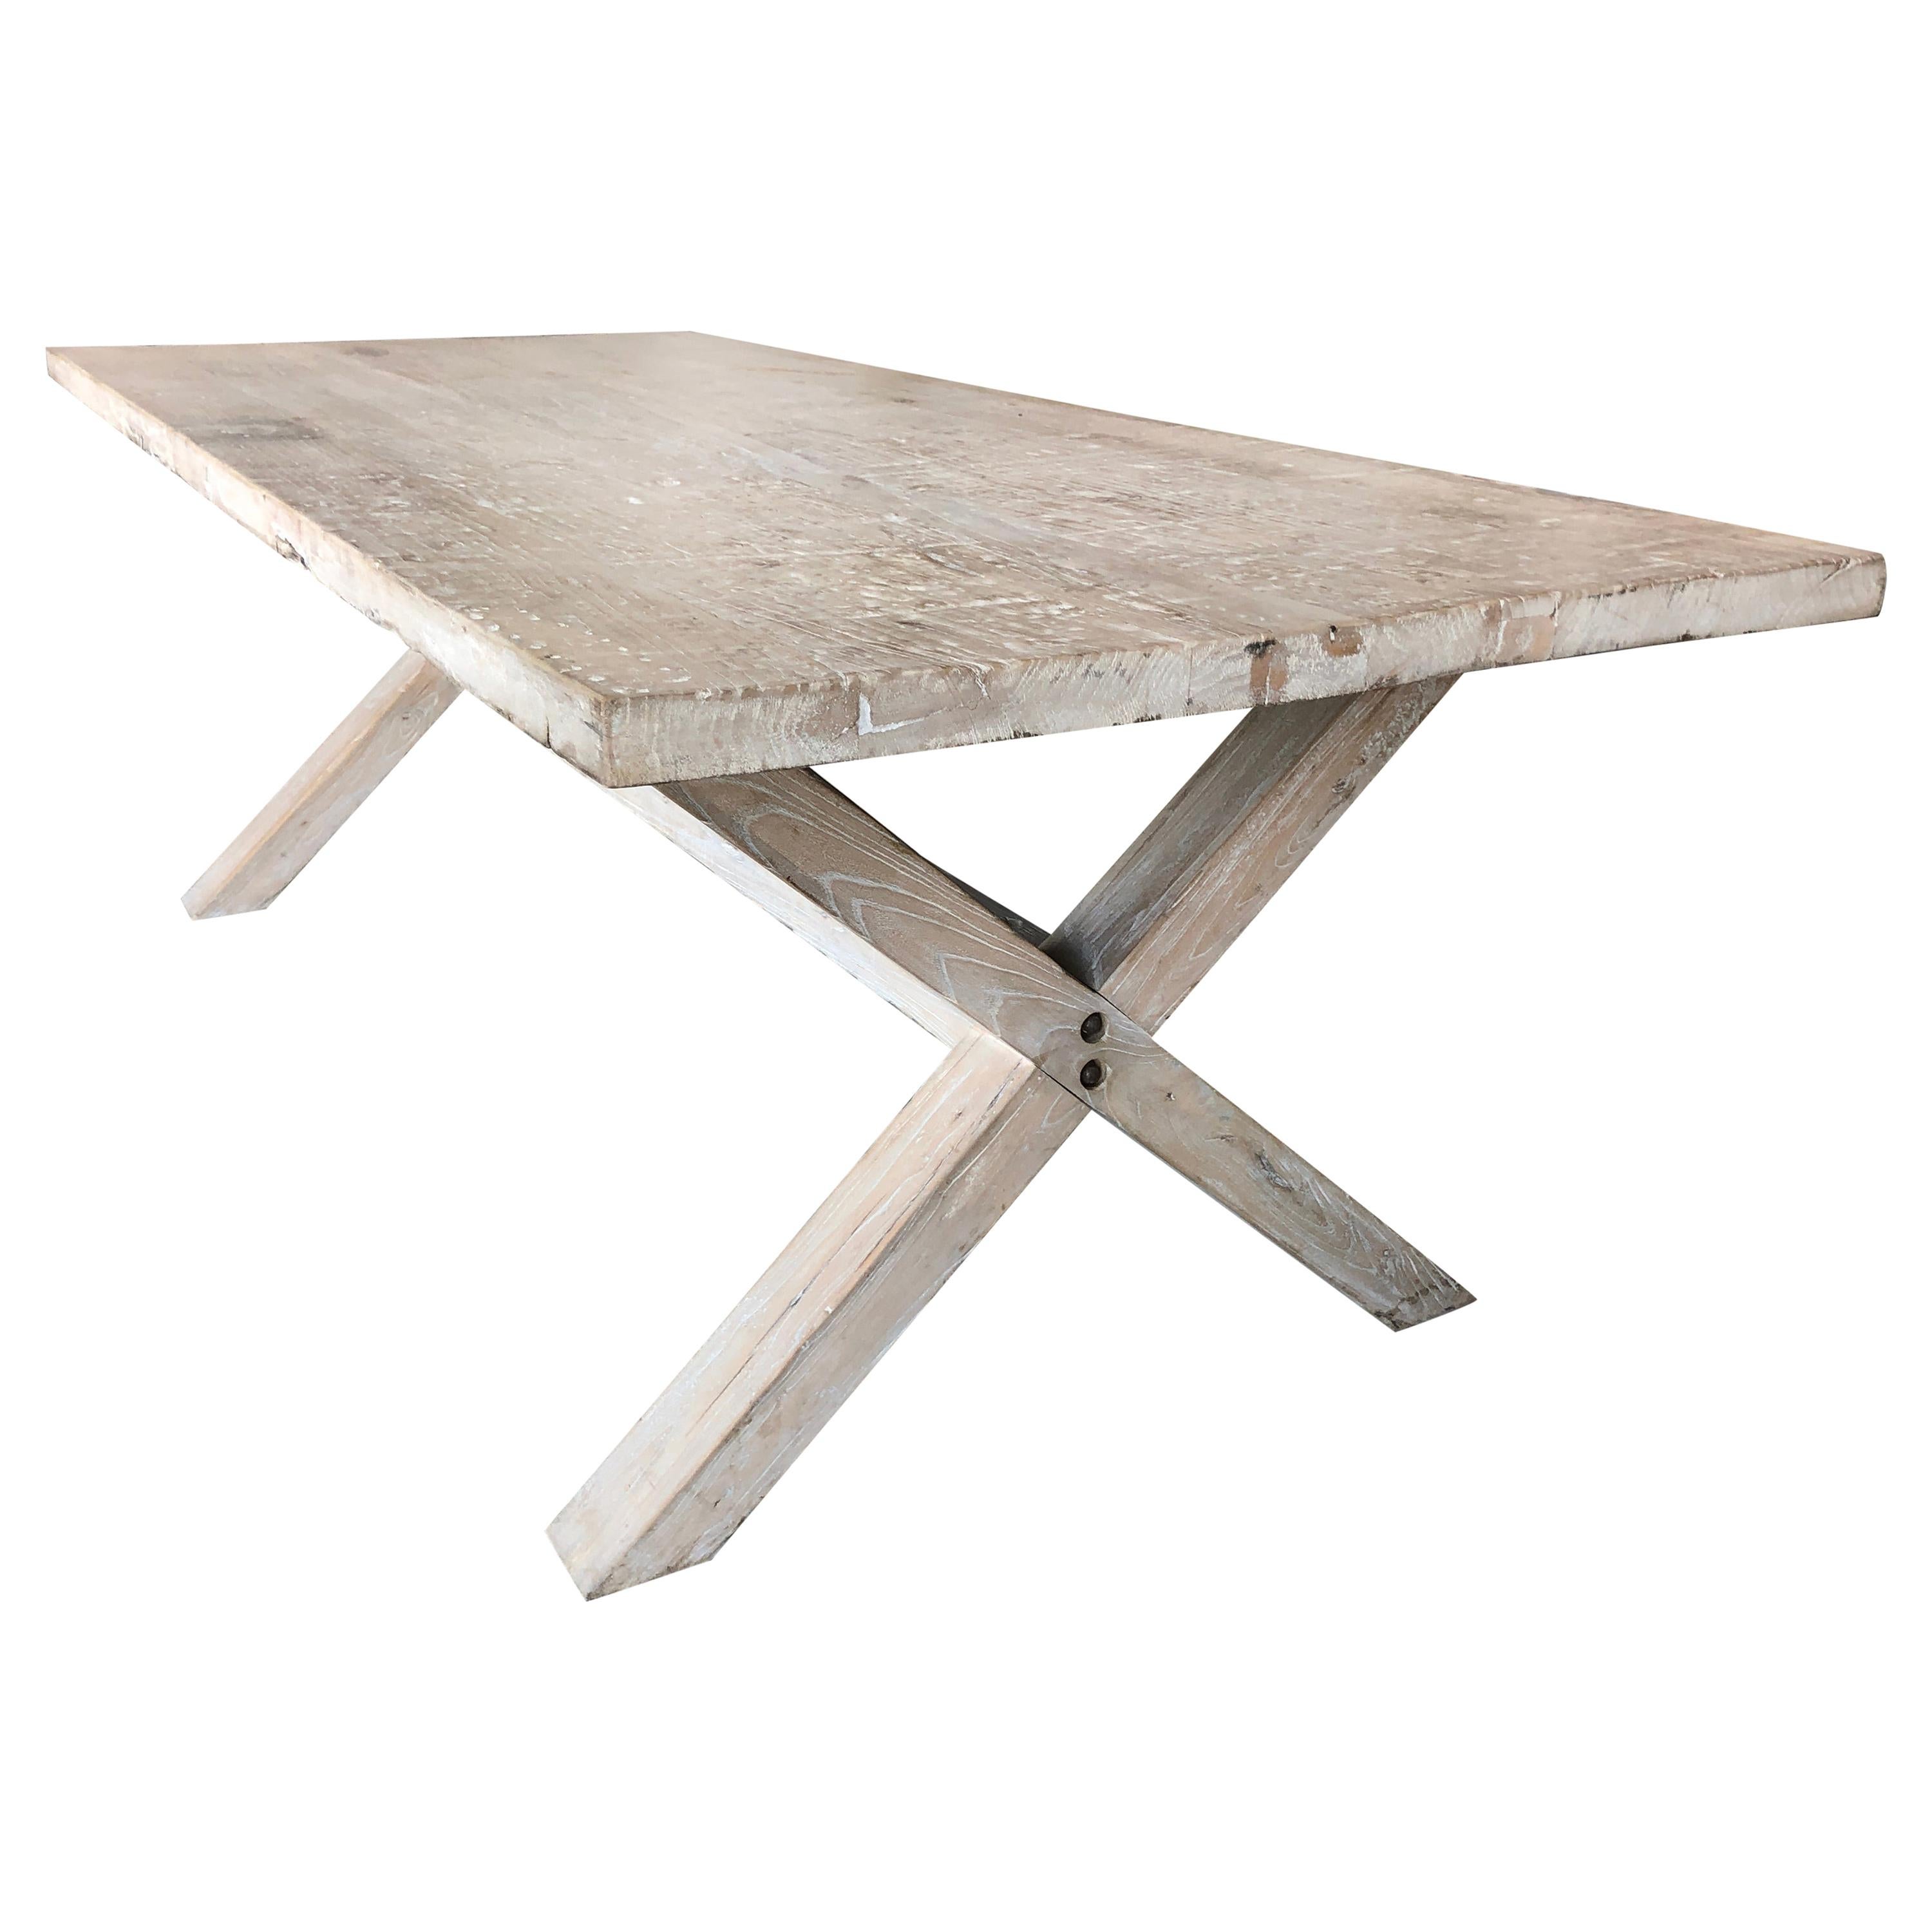 Asian Antique Organic Farm Table in Bleached Poplar Wood, 19th Century For Sale